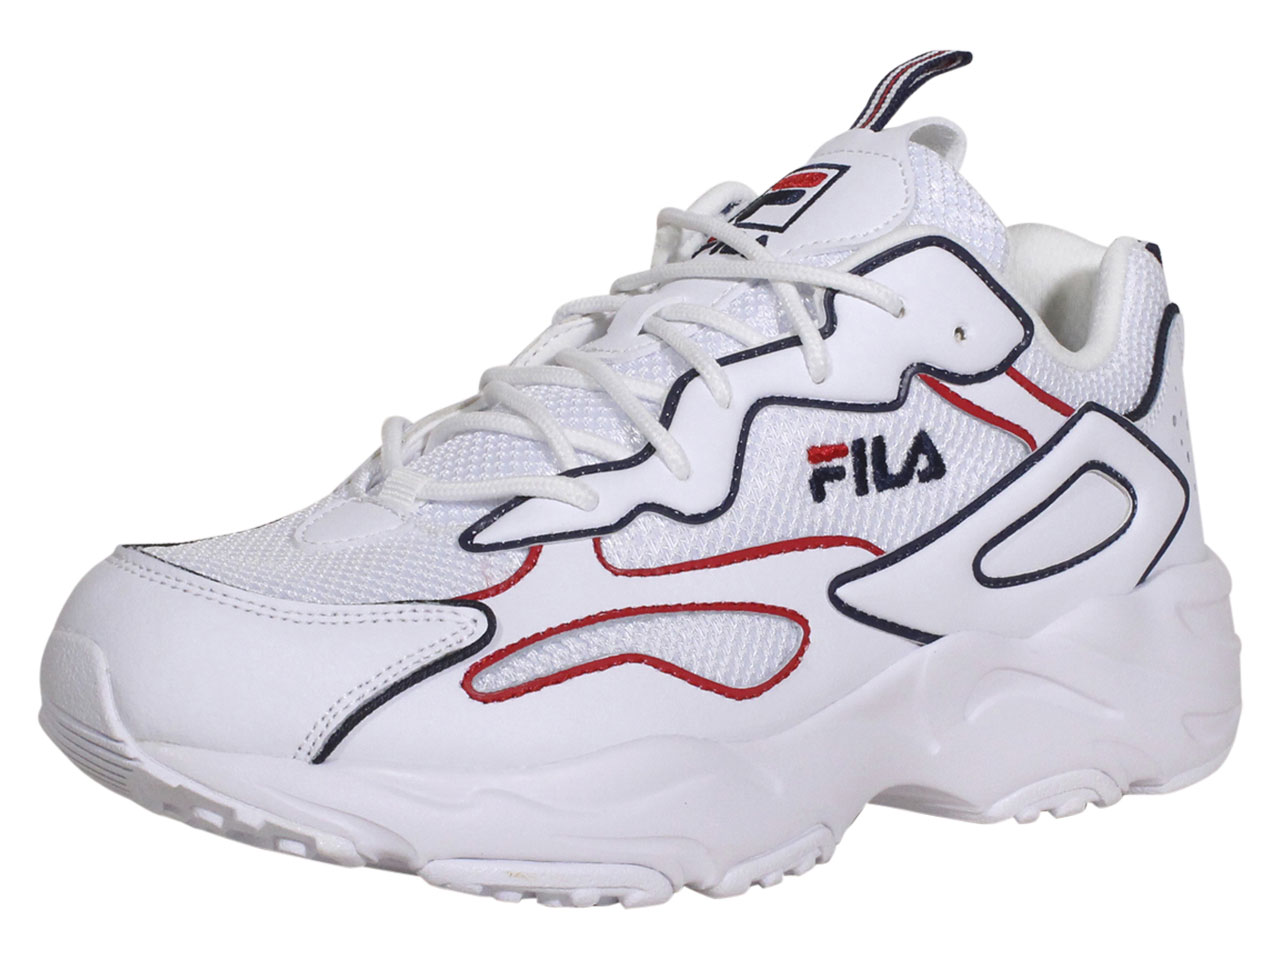 FILA RAY TRACER ANIMAL PRINT SHOES | ILLUSION ST WEAR